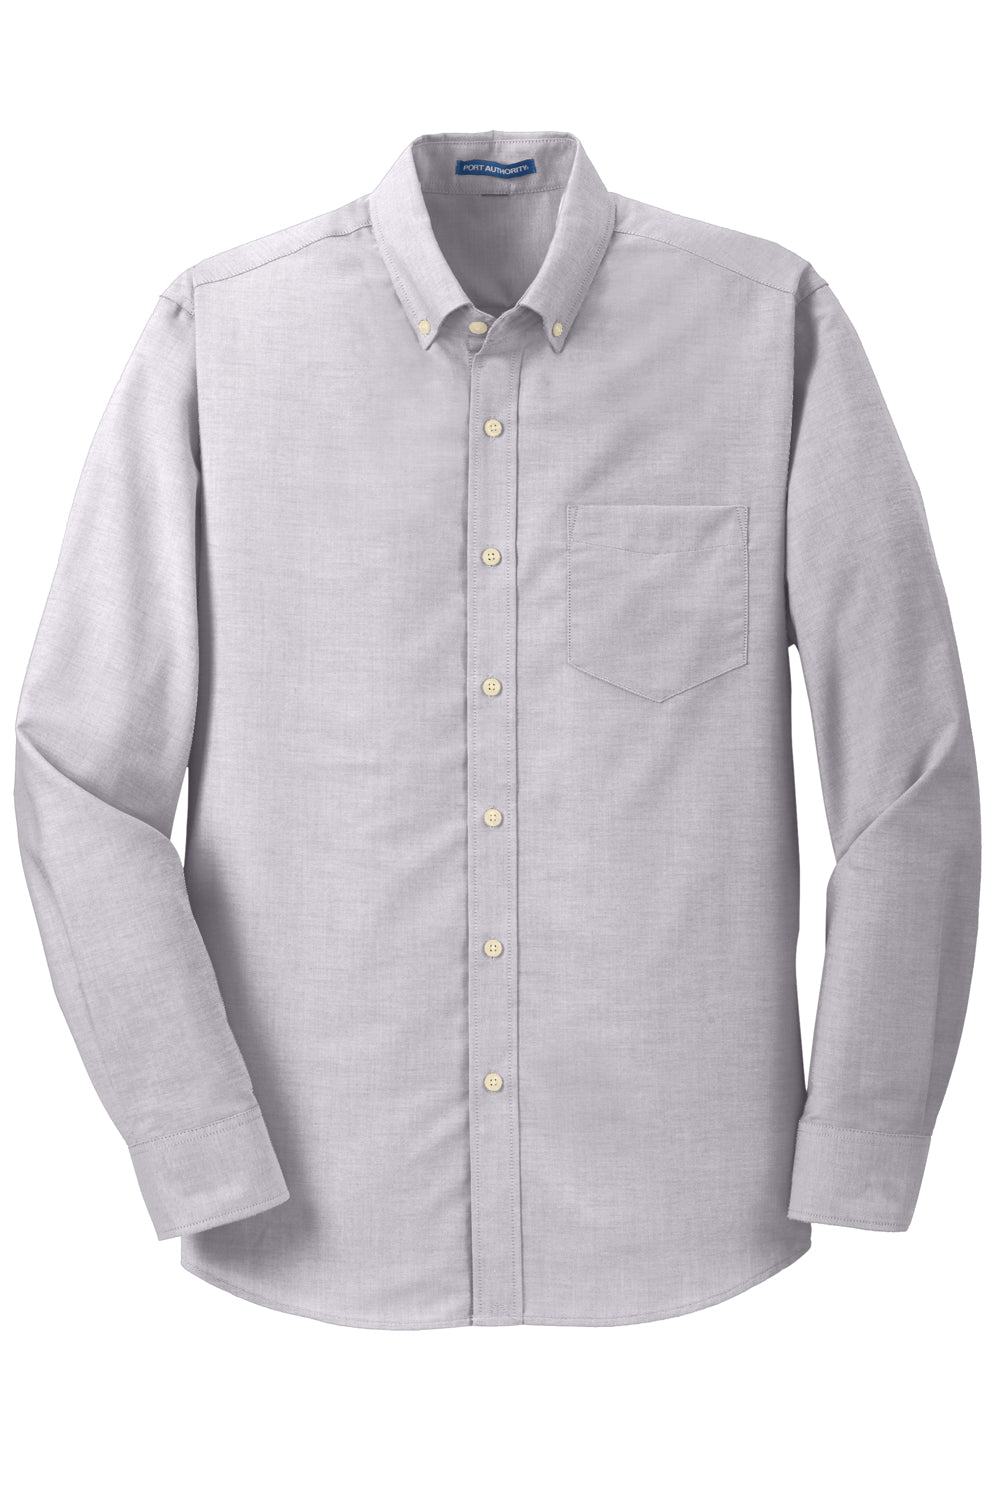 Port Authority S658/TS658 SuperPro Oxford Wrinkle Resistant Long Sleeve Button Down Shirt w/ Pocket Gusty Grey Flat Front